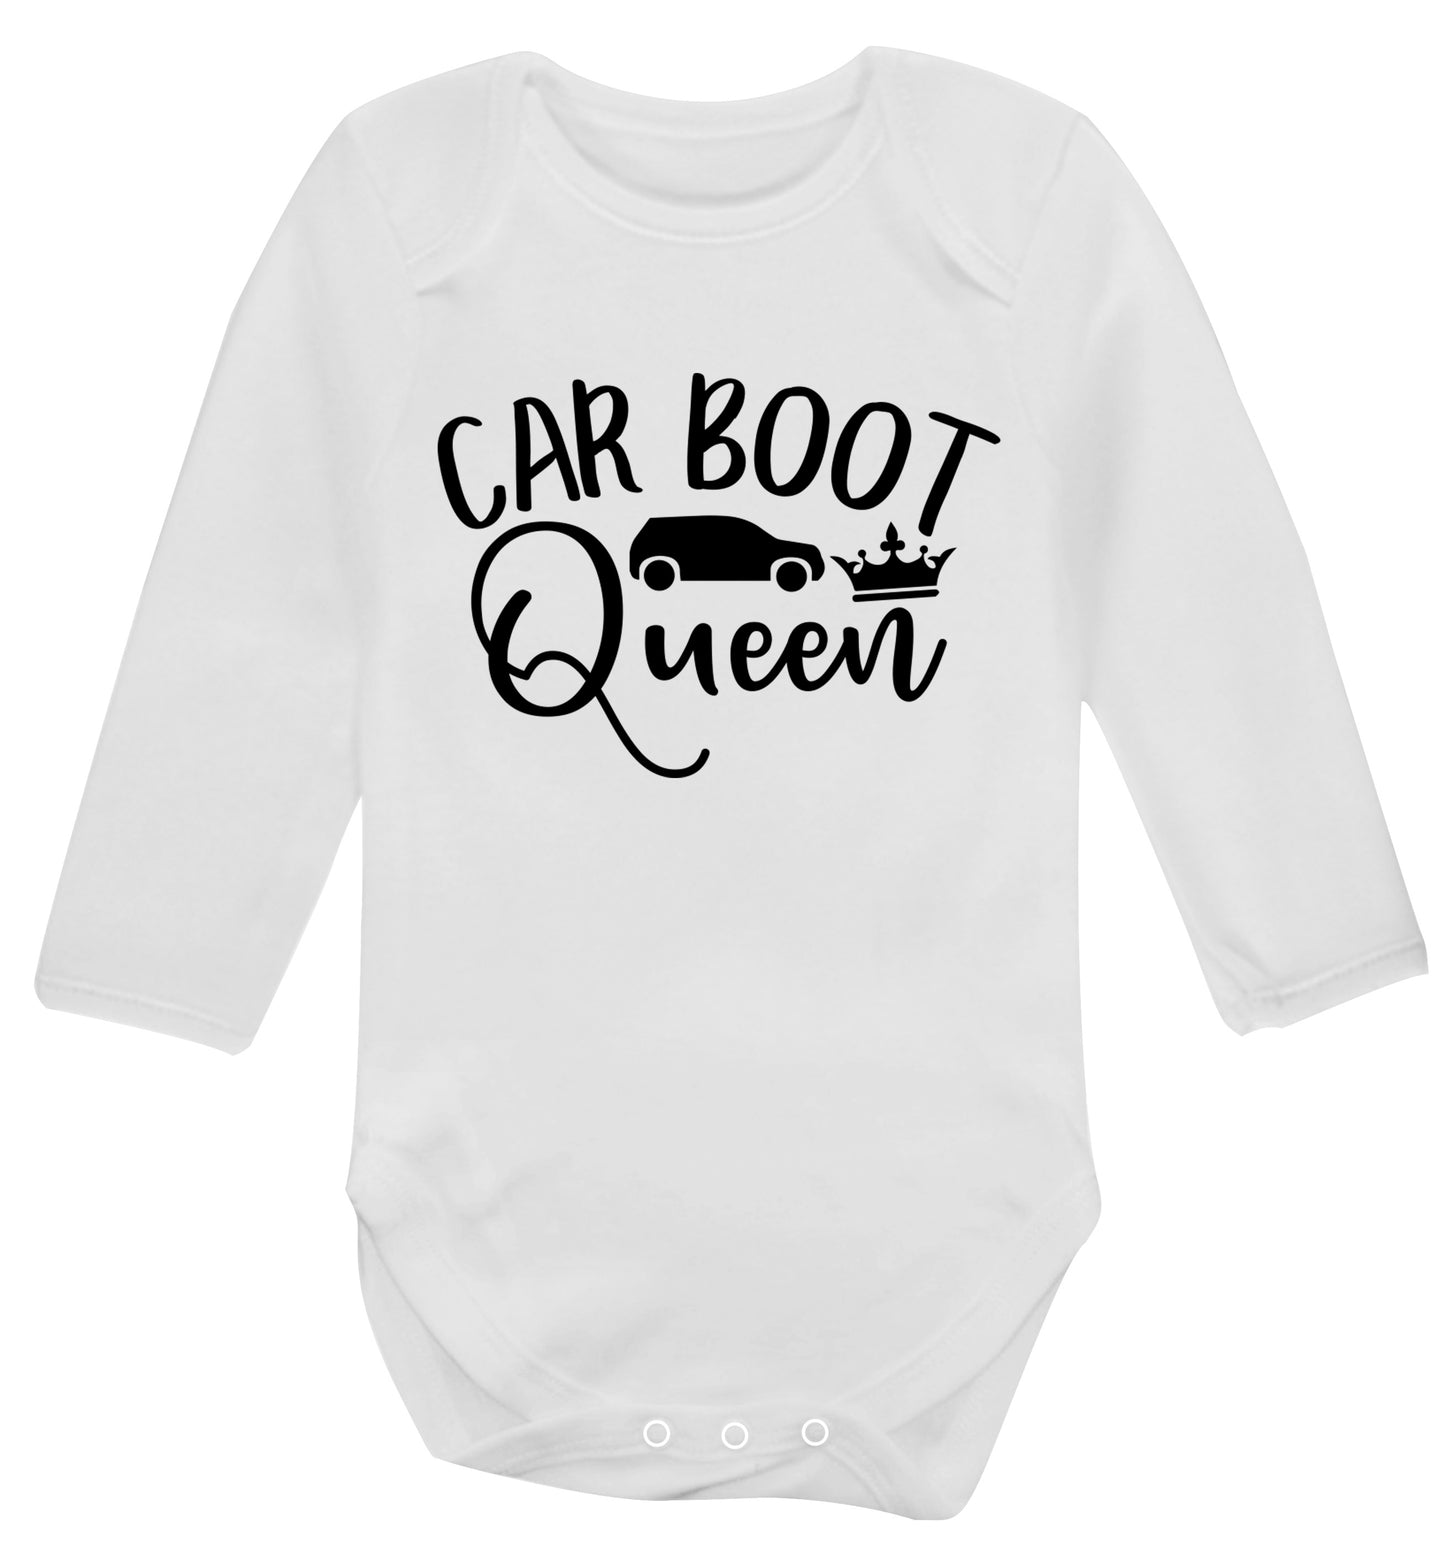 Carboot Queen Baby Vest long sleeved white 6-12 months